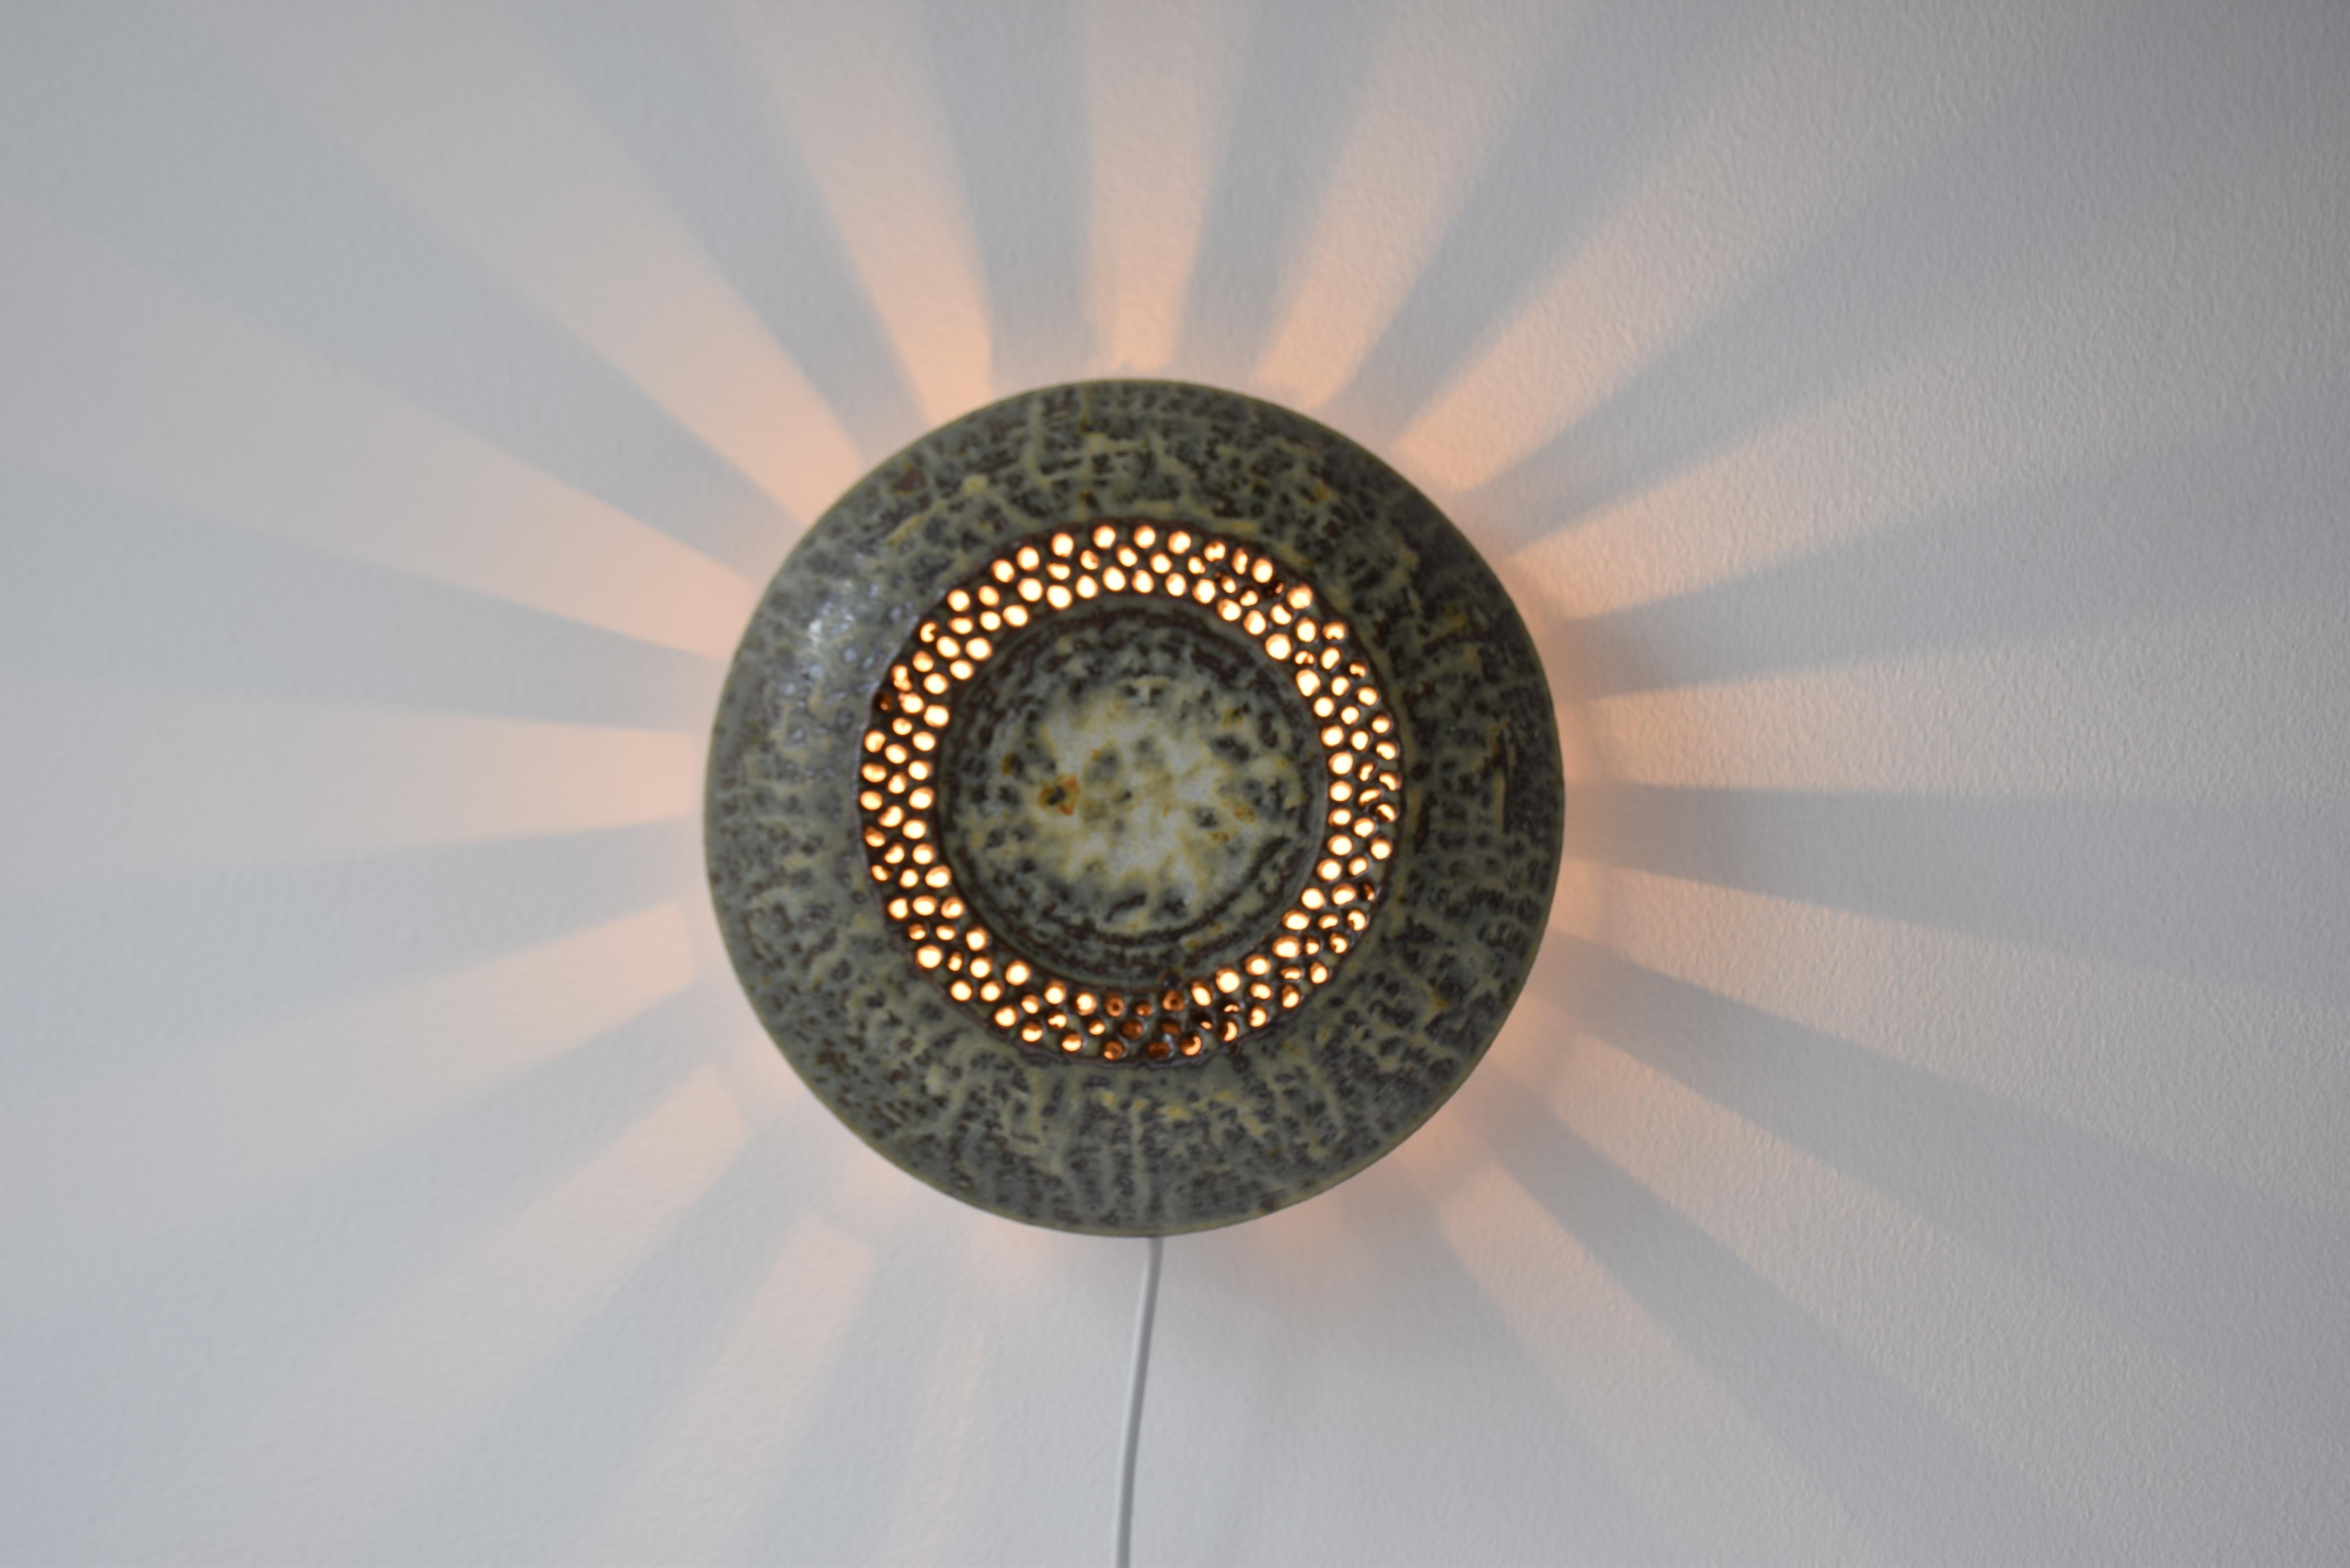 Decorative sun shaped ceramic wall sconce, most likely from a Danish or Scandinavian ceramic workshop. It's in the style of wall sconces by Sejer Keramik, Kingo Keramik and Søholm Keramik.

The vertical openings at the side casts light like